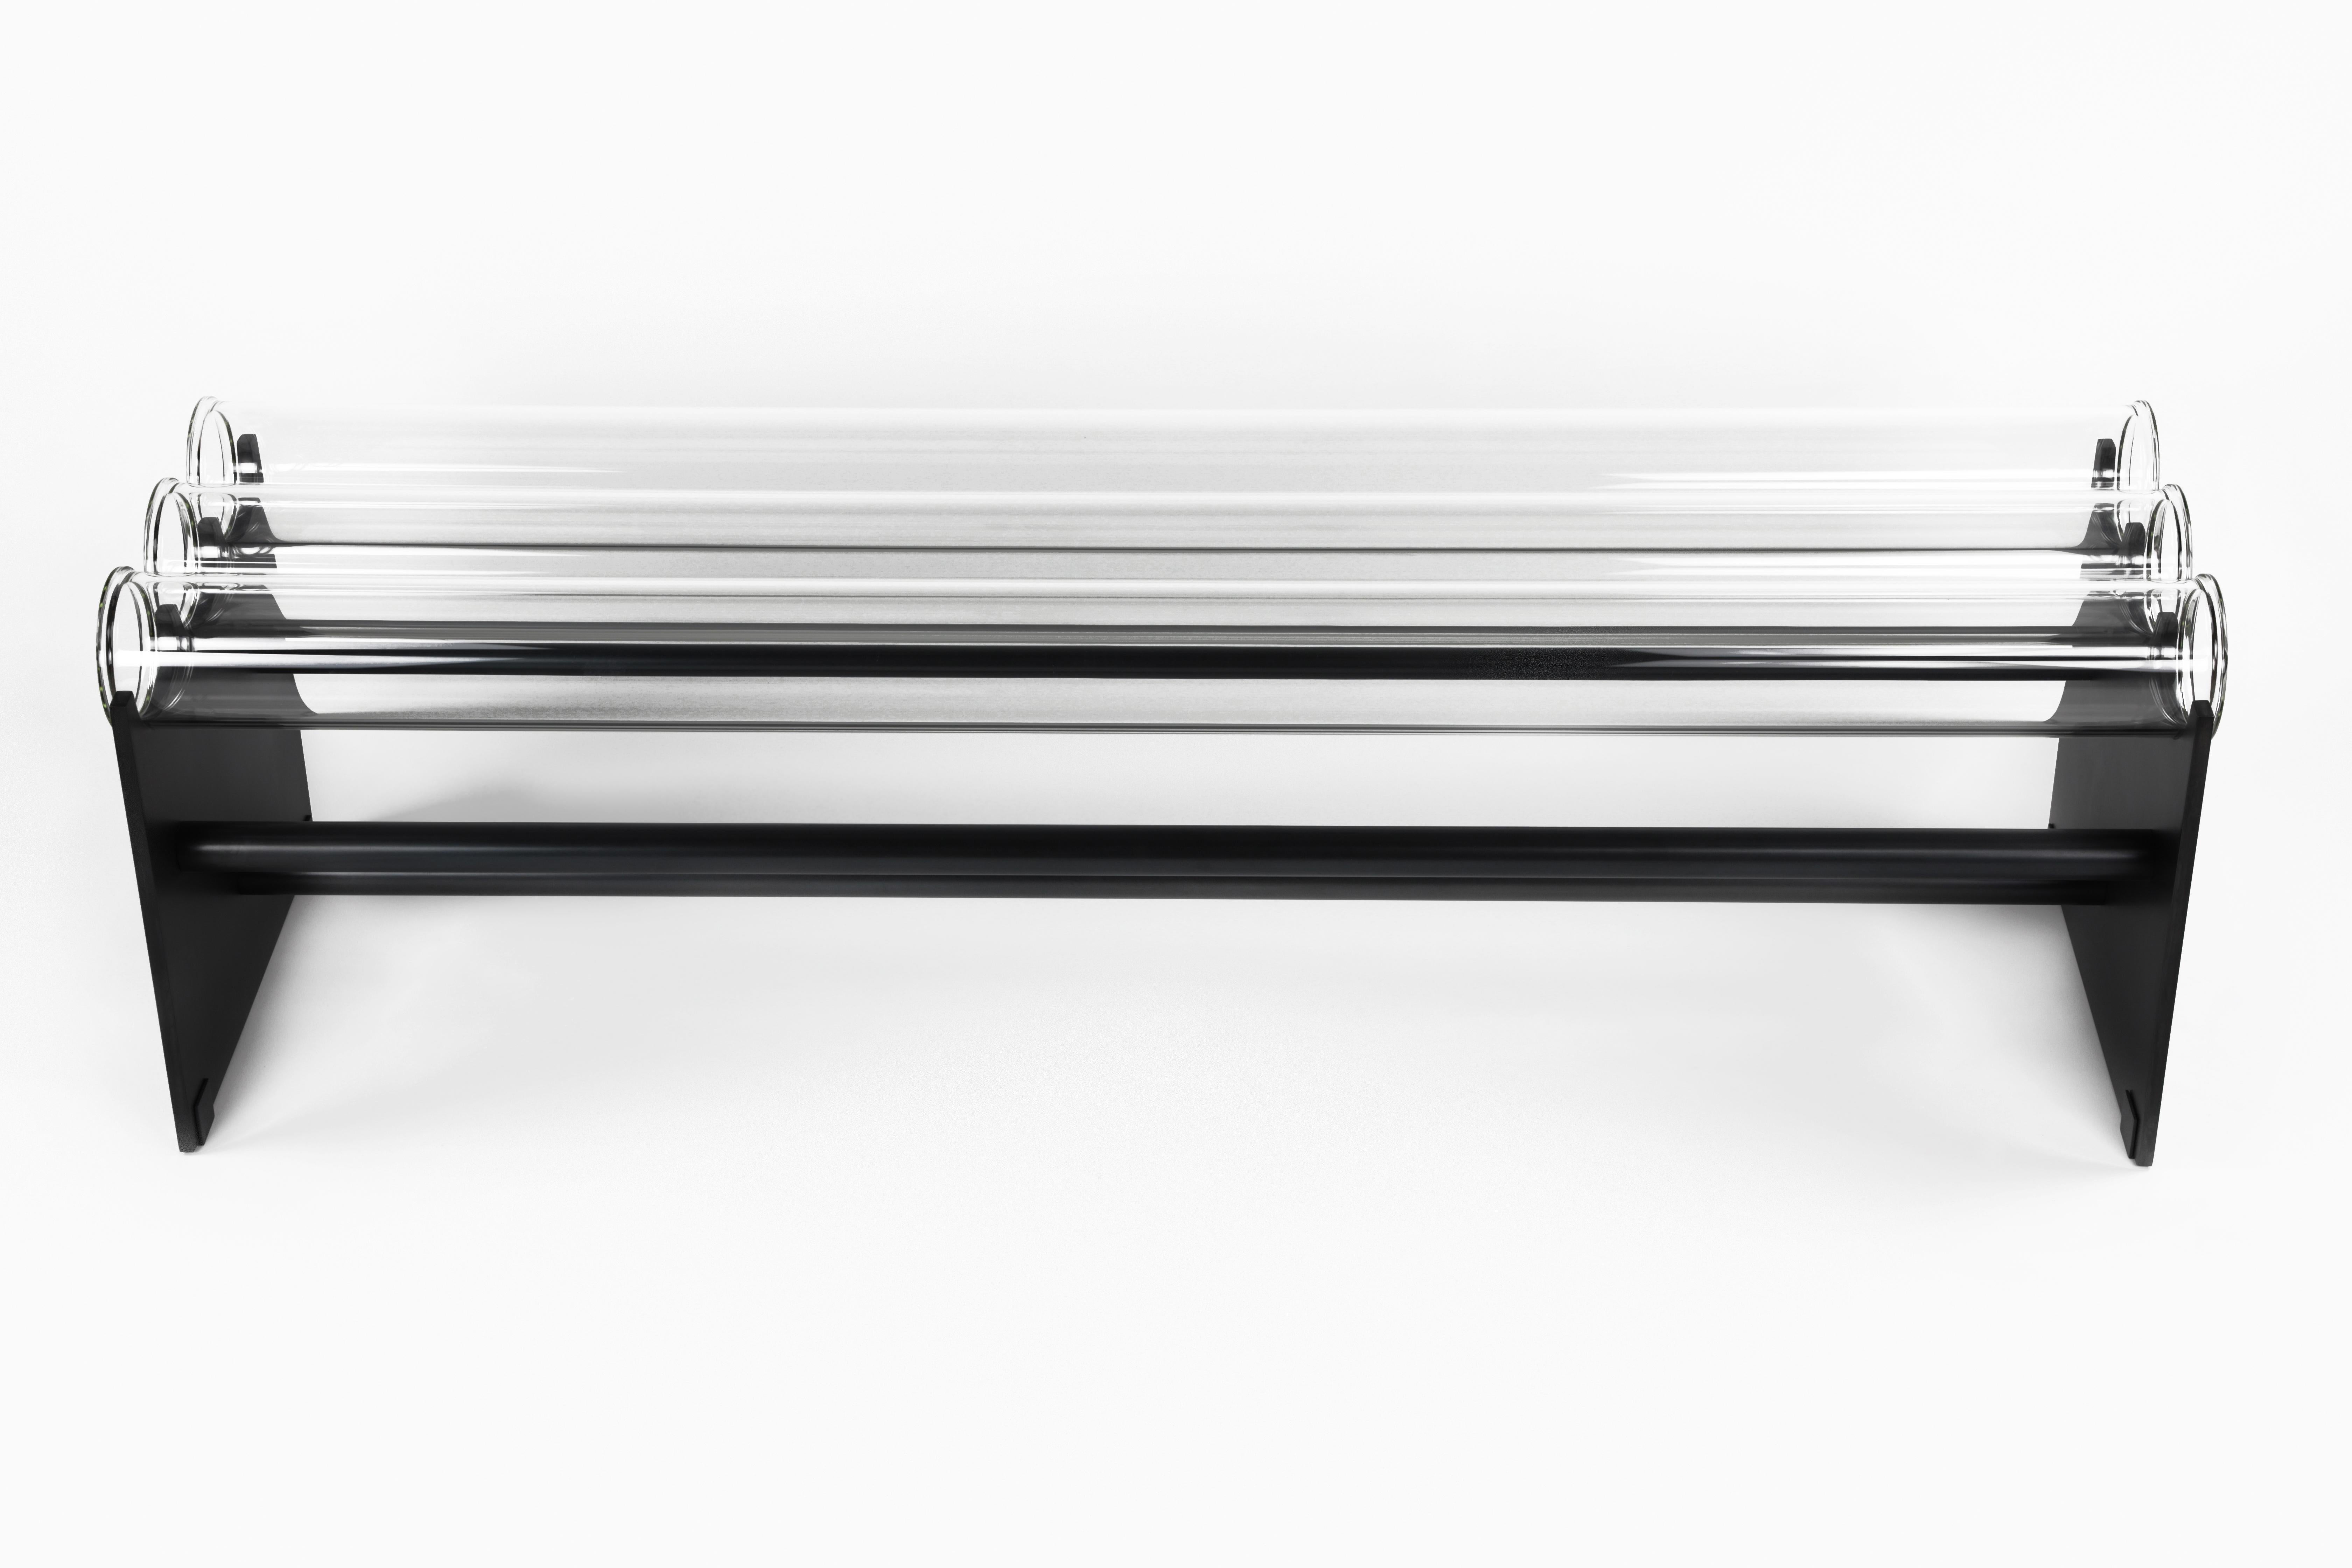 The Museum Bench was originally envisioned to be placed in juxtaposition to art 
to not obstruct the view.
This heavy industrial minimal modern piece is definitely a conversation starter. 
It's made of commercial grade glass pipes strong enough to